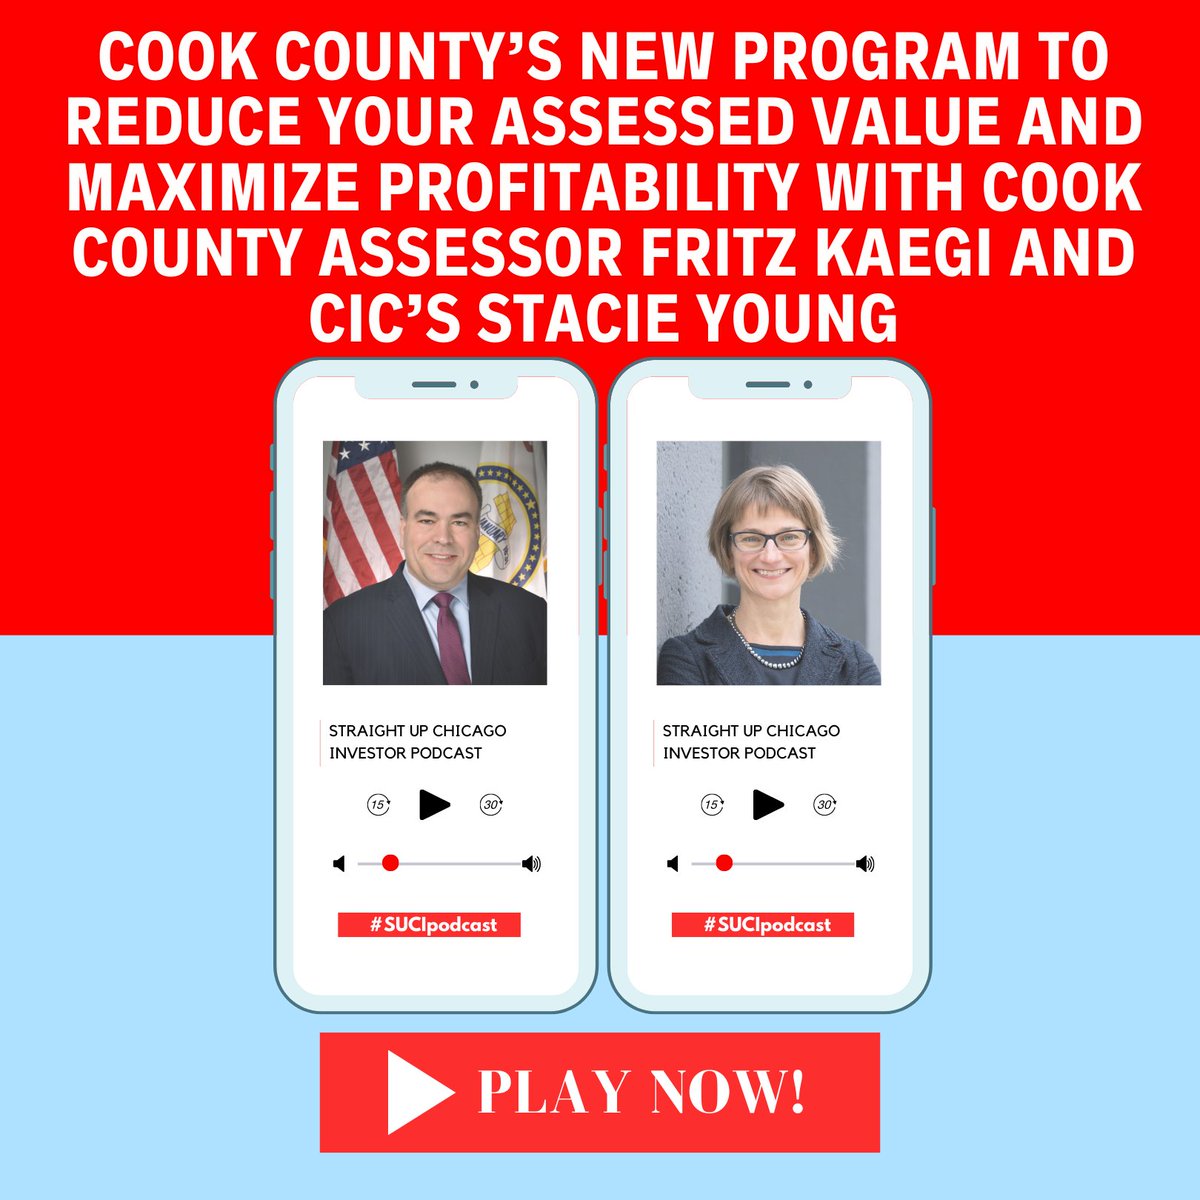 Cook County Assessor Fritz Kaegi and @cicchicago's  Stacie Young joined Straight Up Chicago Investor Podcast to discuss all aspects of property taxes, assessed value, affordable housing, and net operating income. 

Check out the episode: bit.ly/SUCIEpisode239

#SUCIpodcast